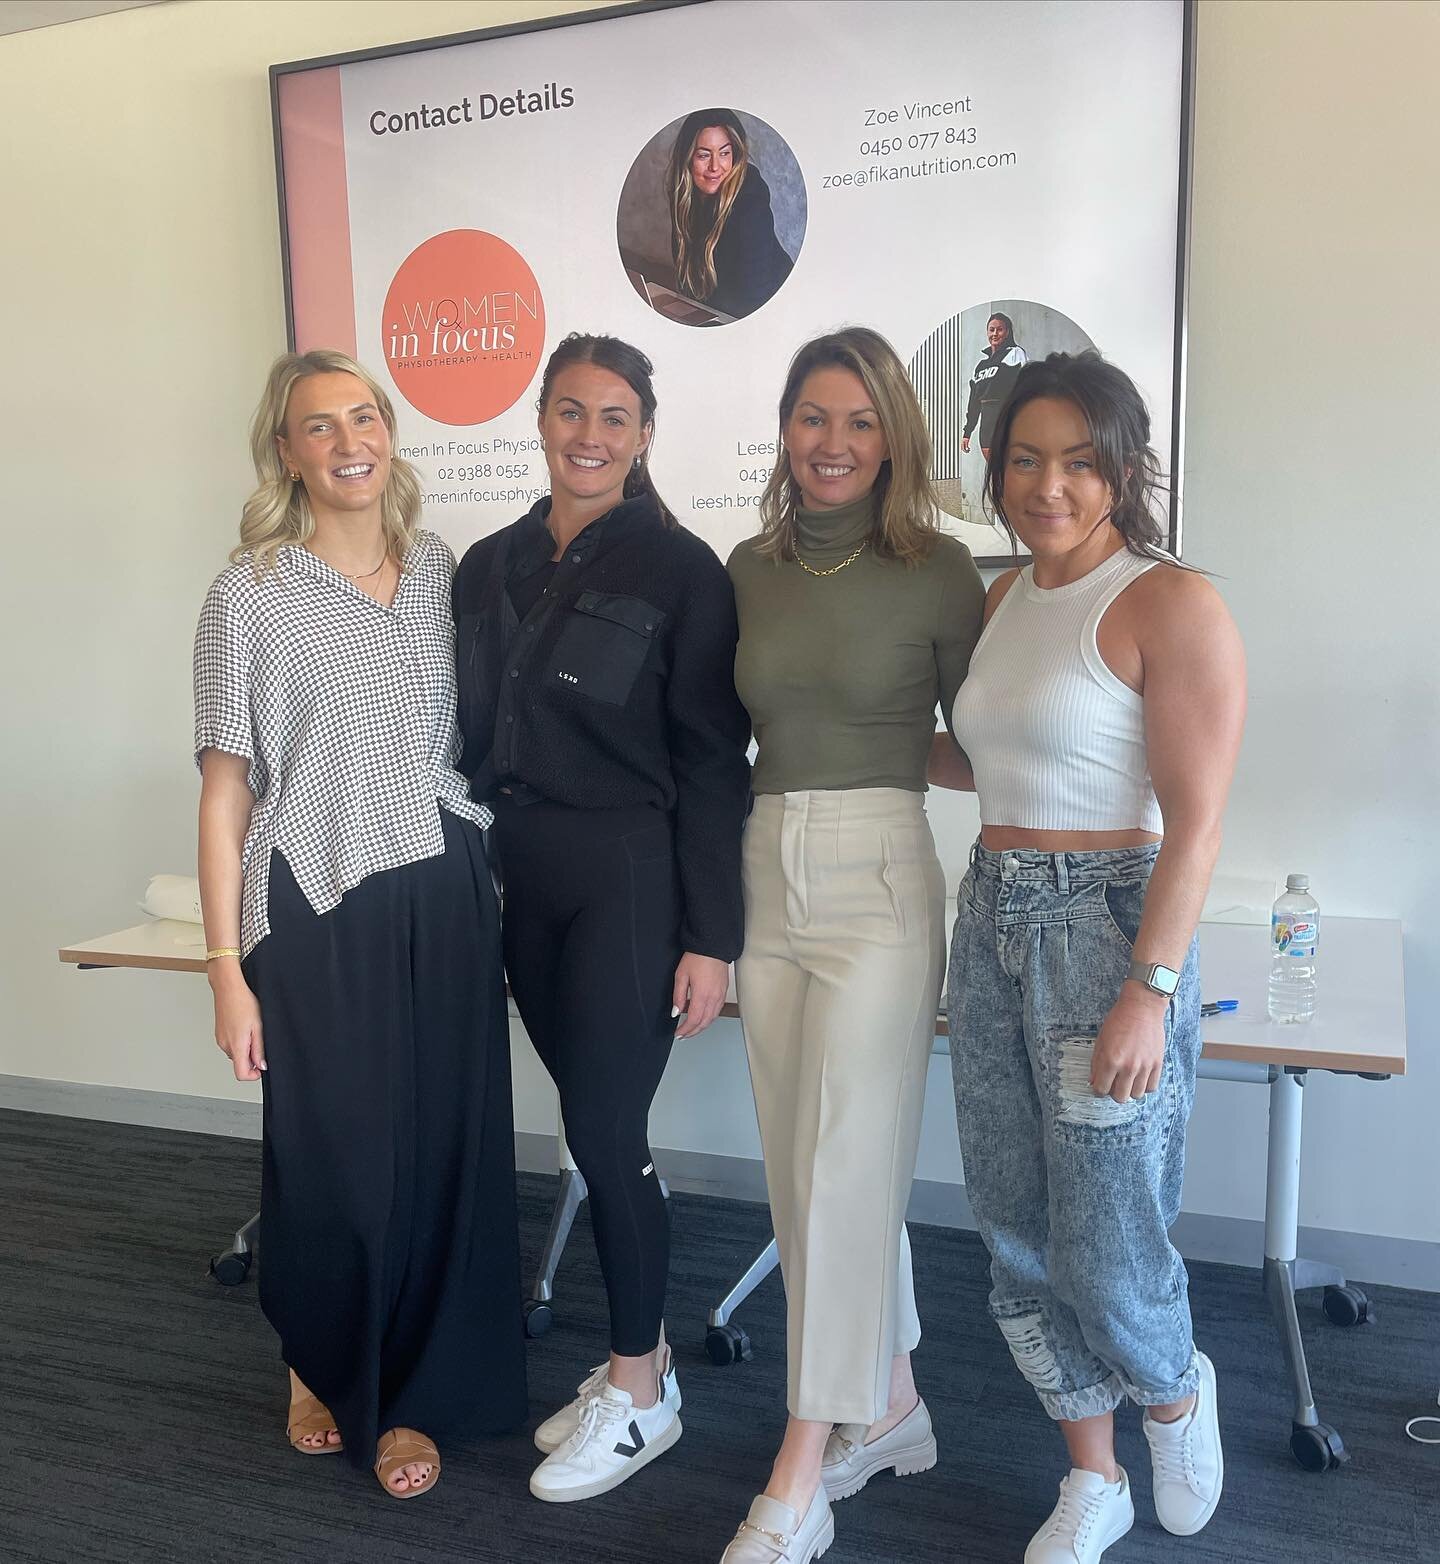 We had the privilege today to speak to members of the community who were interested about all things Exercise, Pelvic health &amp; nutrition during the pregnancy and early postpartum periods!! 

Thank you so much to Bondi strength coach @leesh.brown 